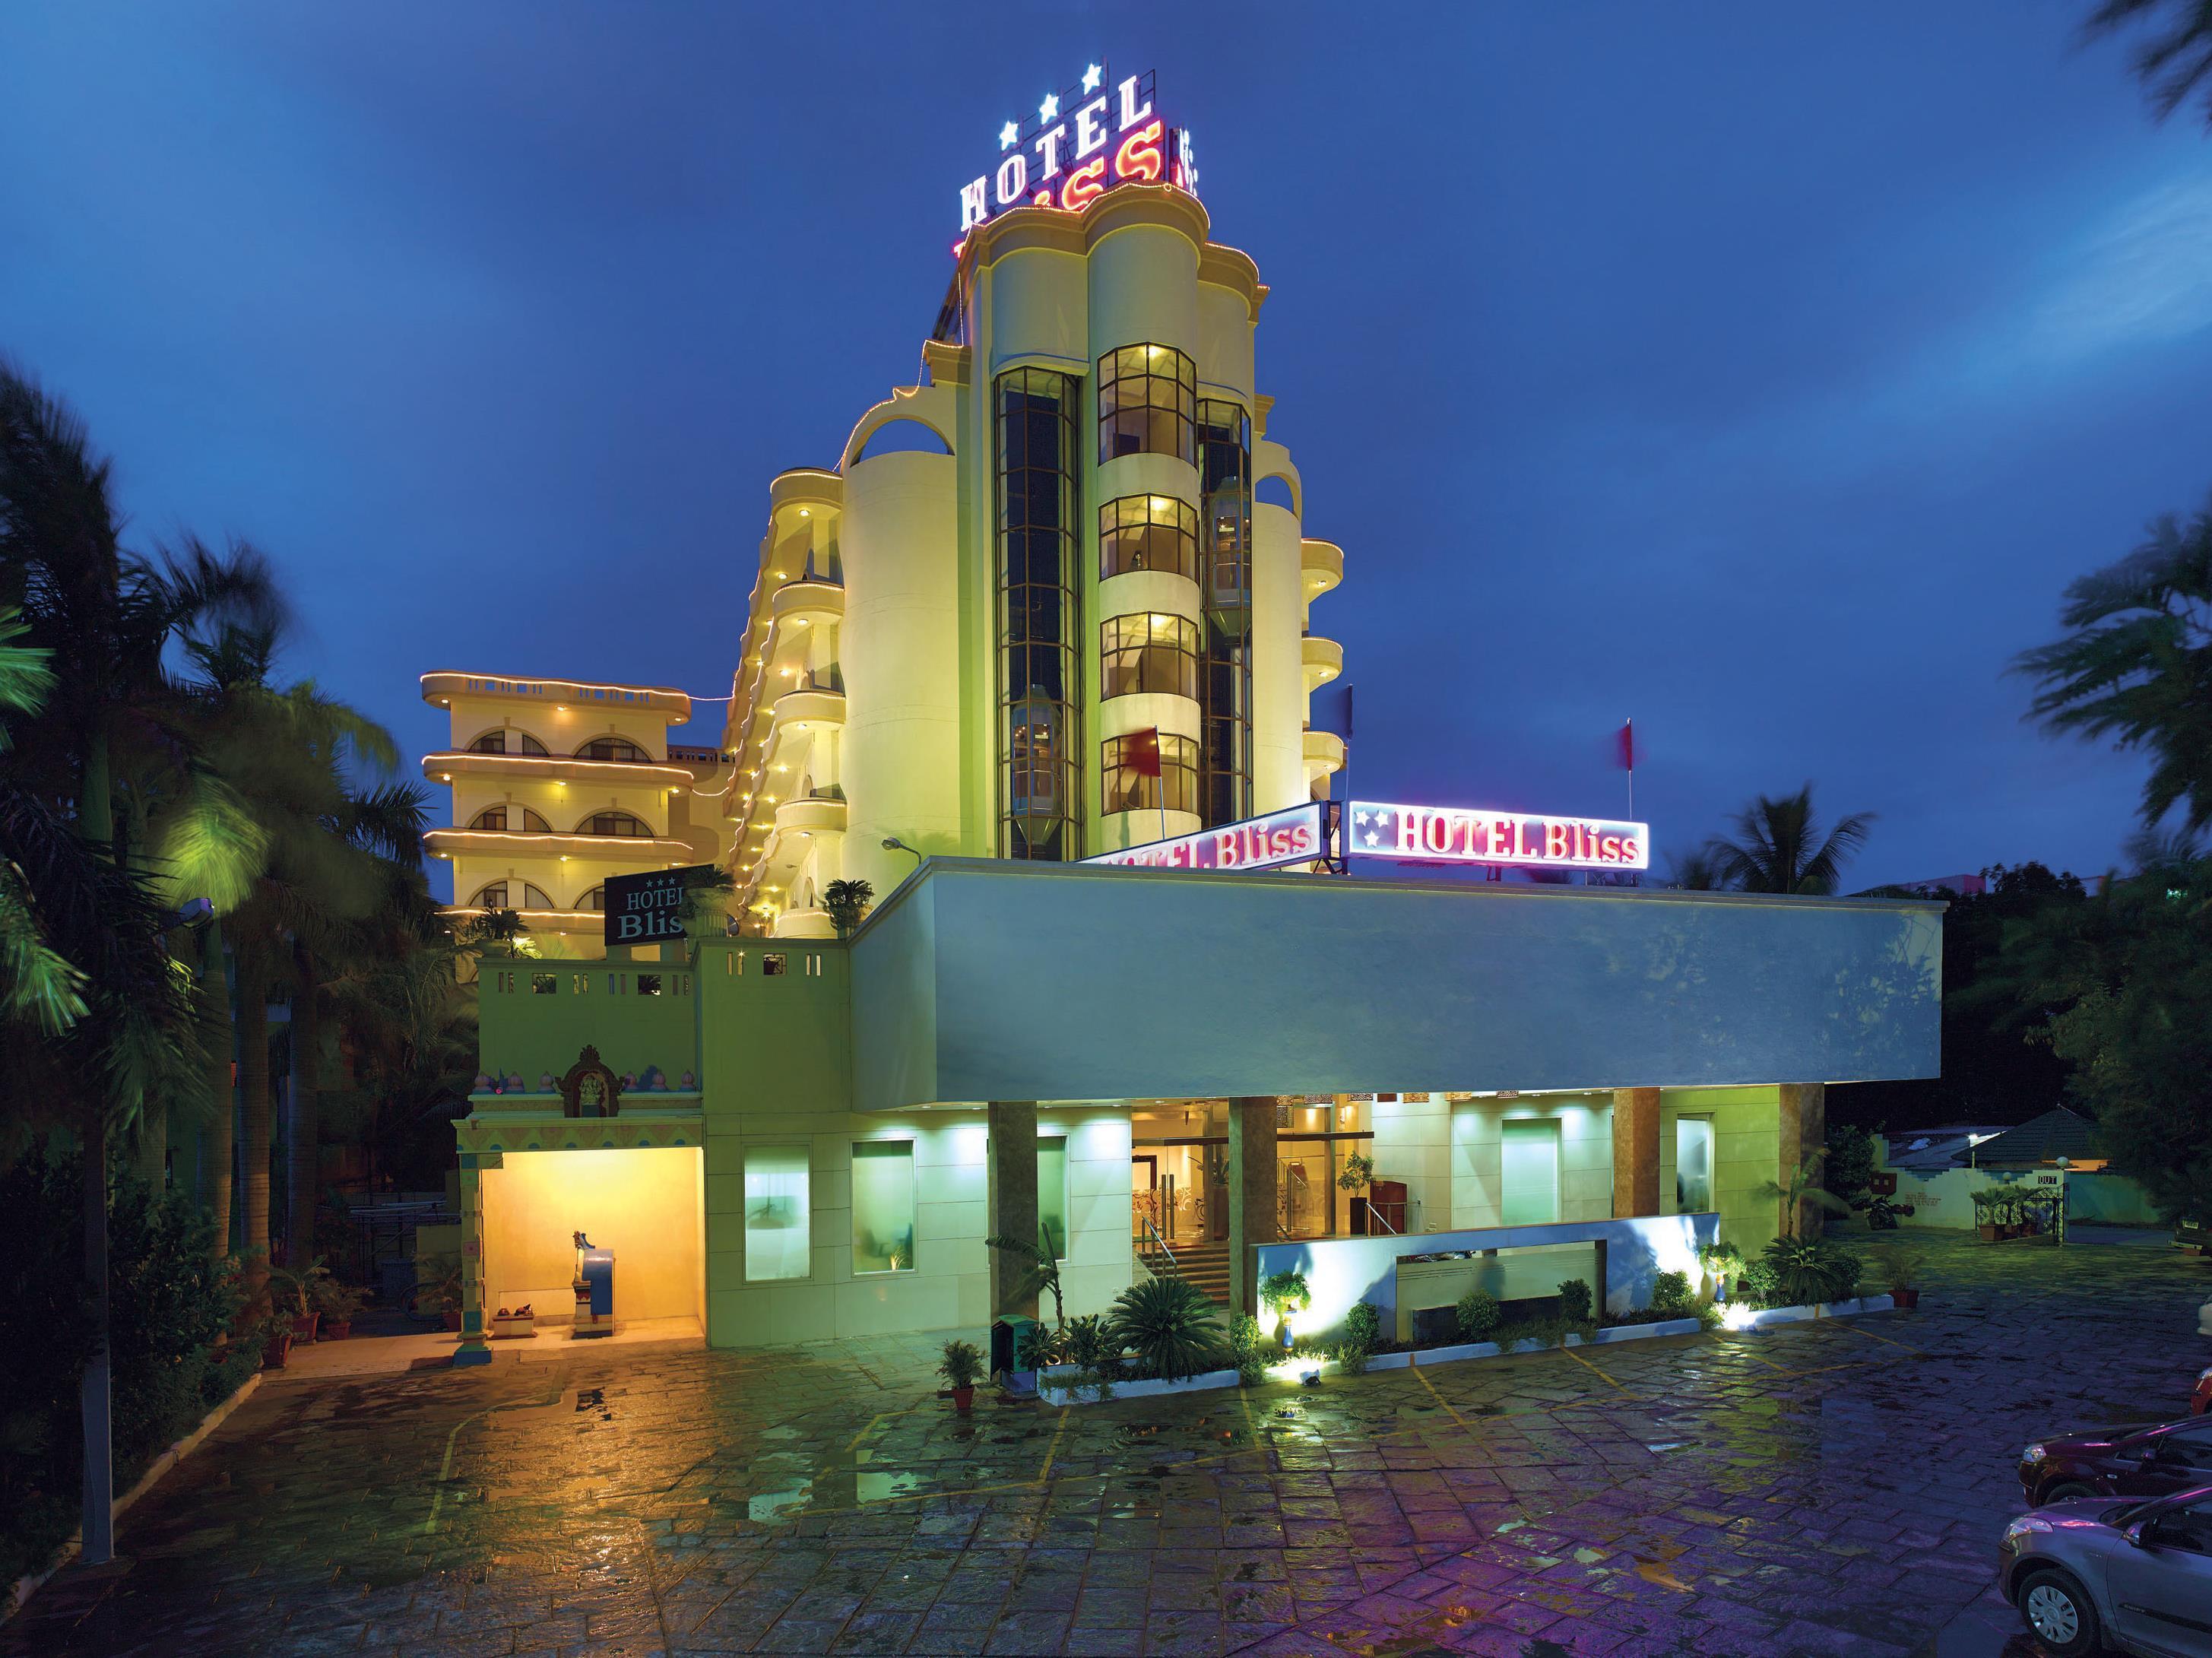 Hotel Bliss India FAQ 2016, What facilities are there in Hotel Bliss India 2016, What Languages Spoken are Supported in Hotel Bliss India 2016, Which payment cards are accepted in Hotel Bliss India , India Hotel Bliss room facilities and services Q&A 2016, India Hotel Bliss online booking services 2016, India Hotel Bliss address 2016, India Hotel Bliss telephone number 2016,India Hotel Bliss map 2016, India Hotel Bliss traffic guide 2016, how to go India Hotel Bliss, India Hotel Bliss booking online 2016, India Hotel Bliss room types 2016.